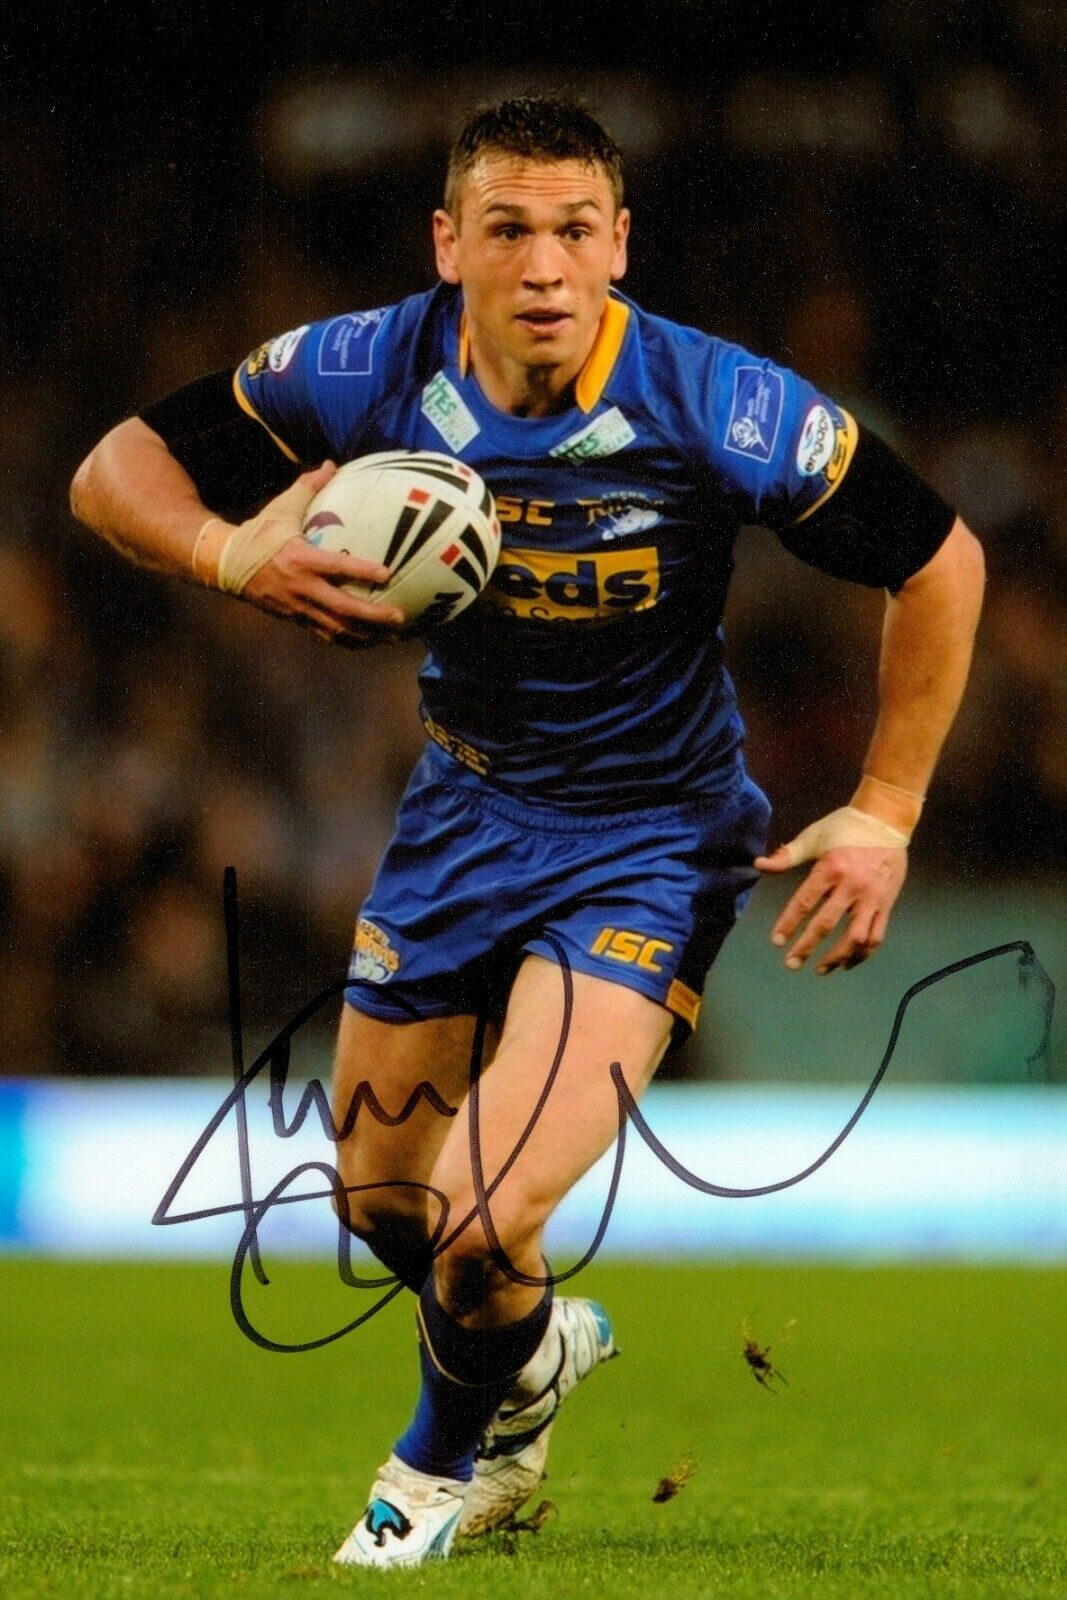 Kevin Sinfield Signed 6x4 Photo Poster painting Leeds Rhinos England Rugby League Autograph +COA